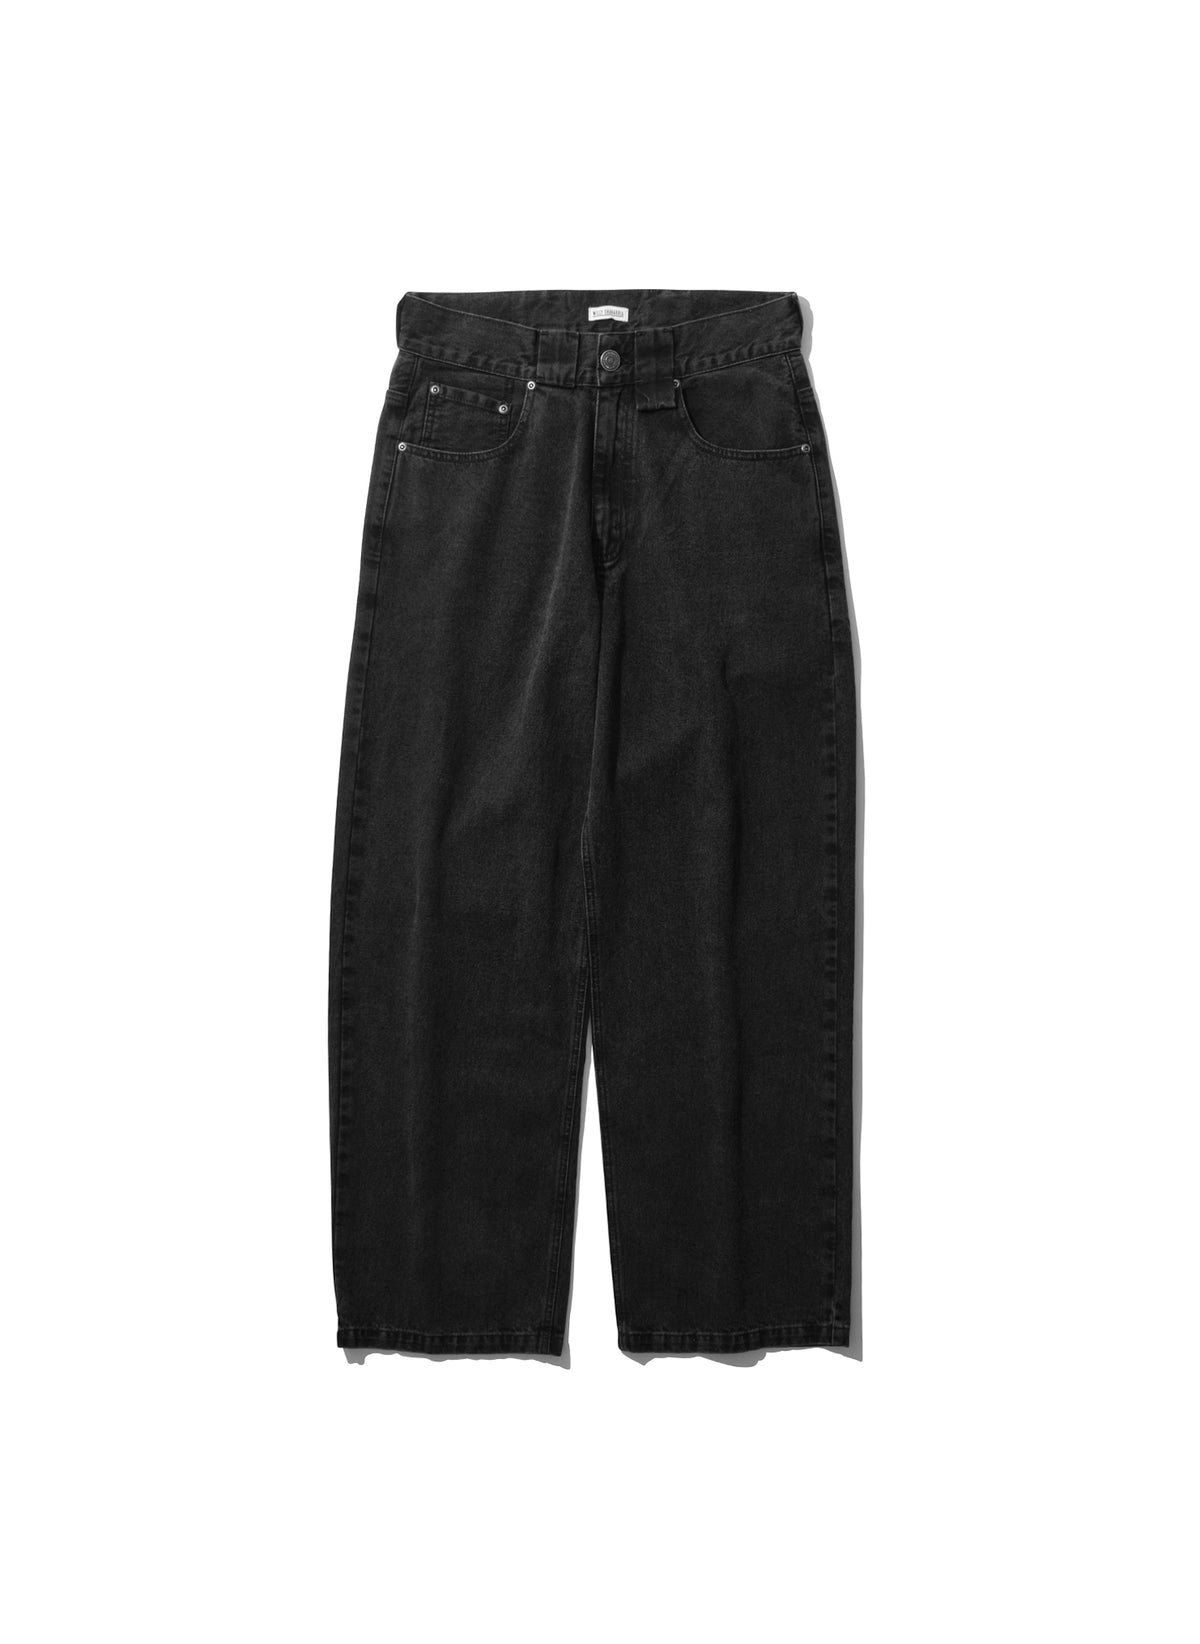 <span style="color: #f50b0b;">Last One</span> 
WILLY CHAVARRIA / STRAIGHT DENIM PANTS WASHED BLACK